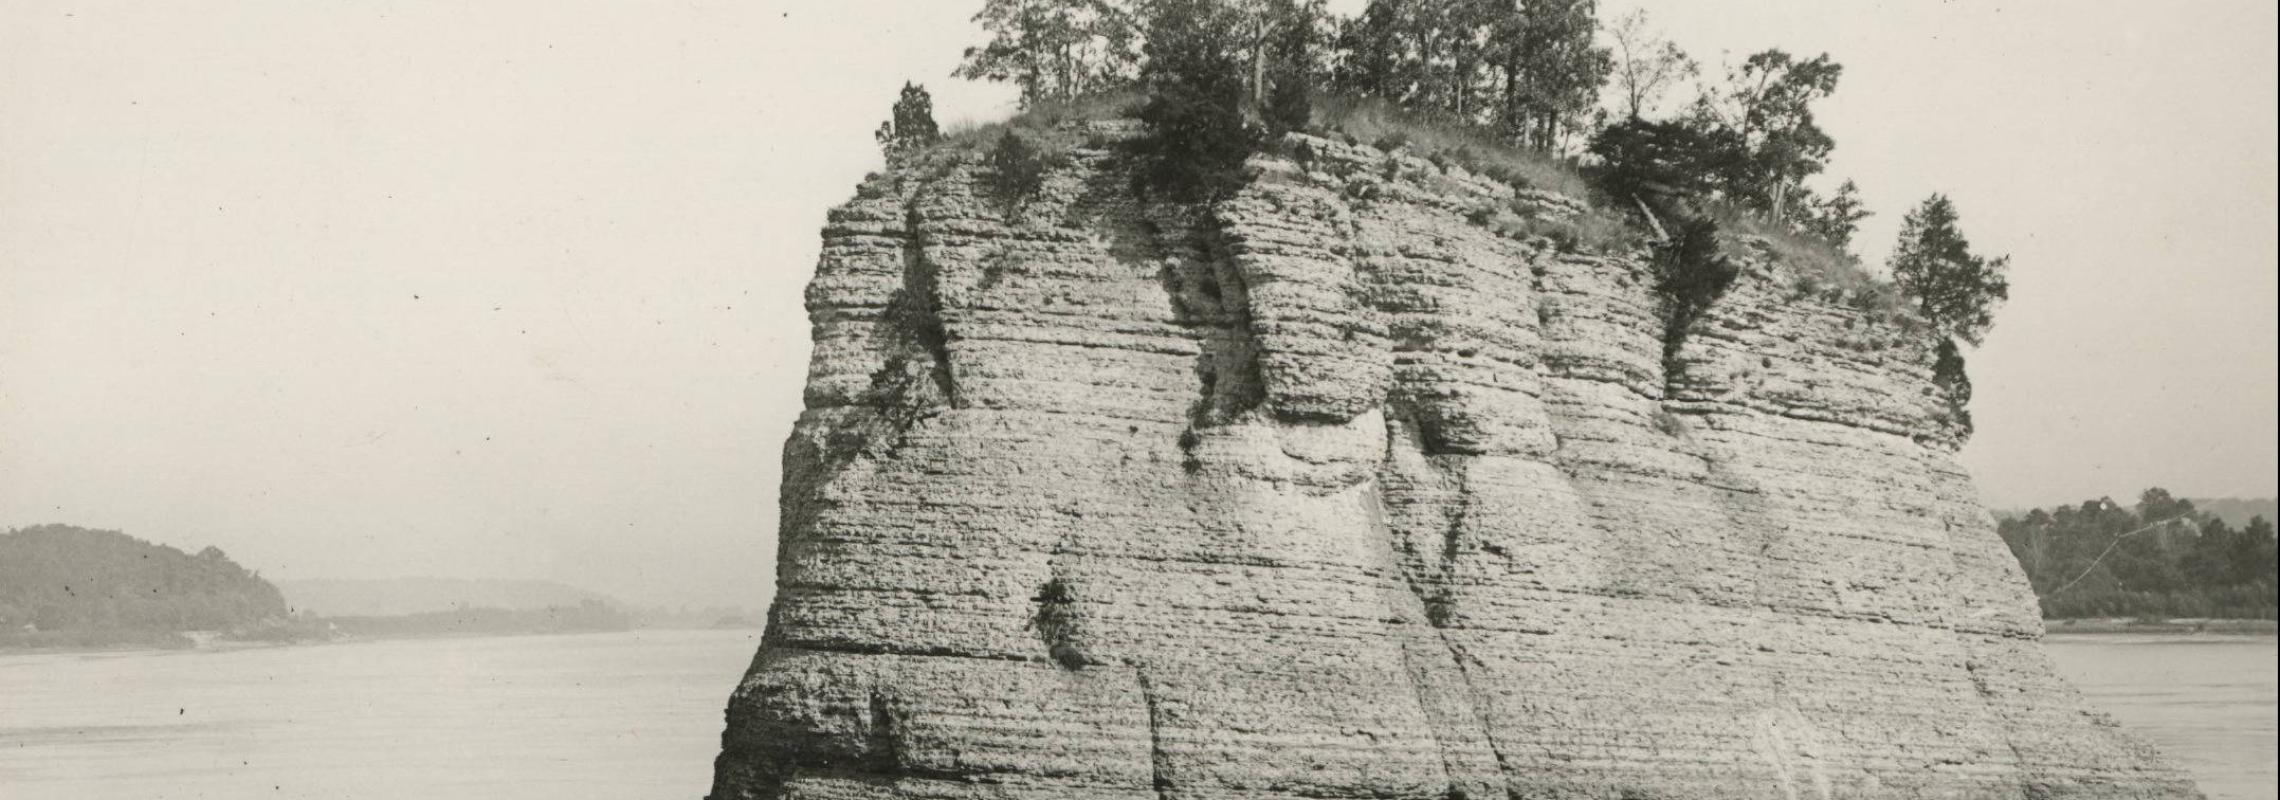 historic postcard of Tower Rock in Mississippi River, Perry County